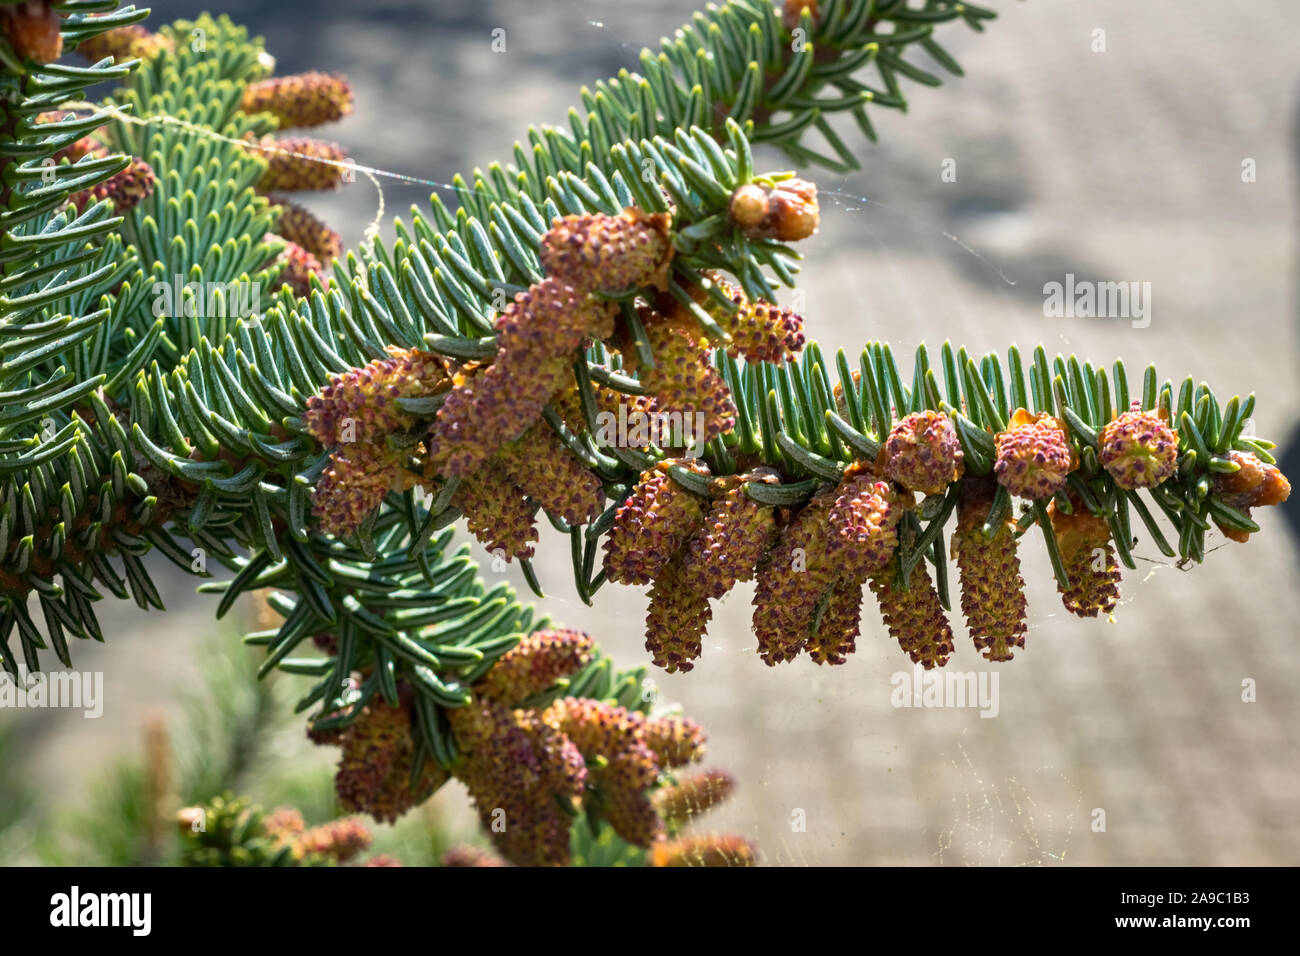 Fully grown pollen of Abies pinsapo or Spanish fir Stock Photo